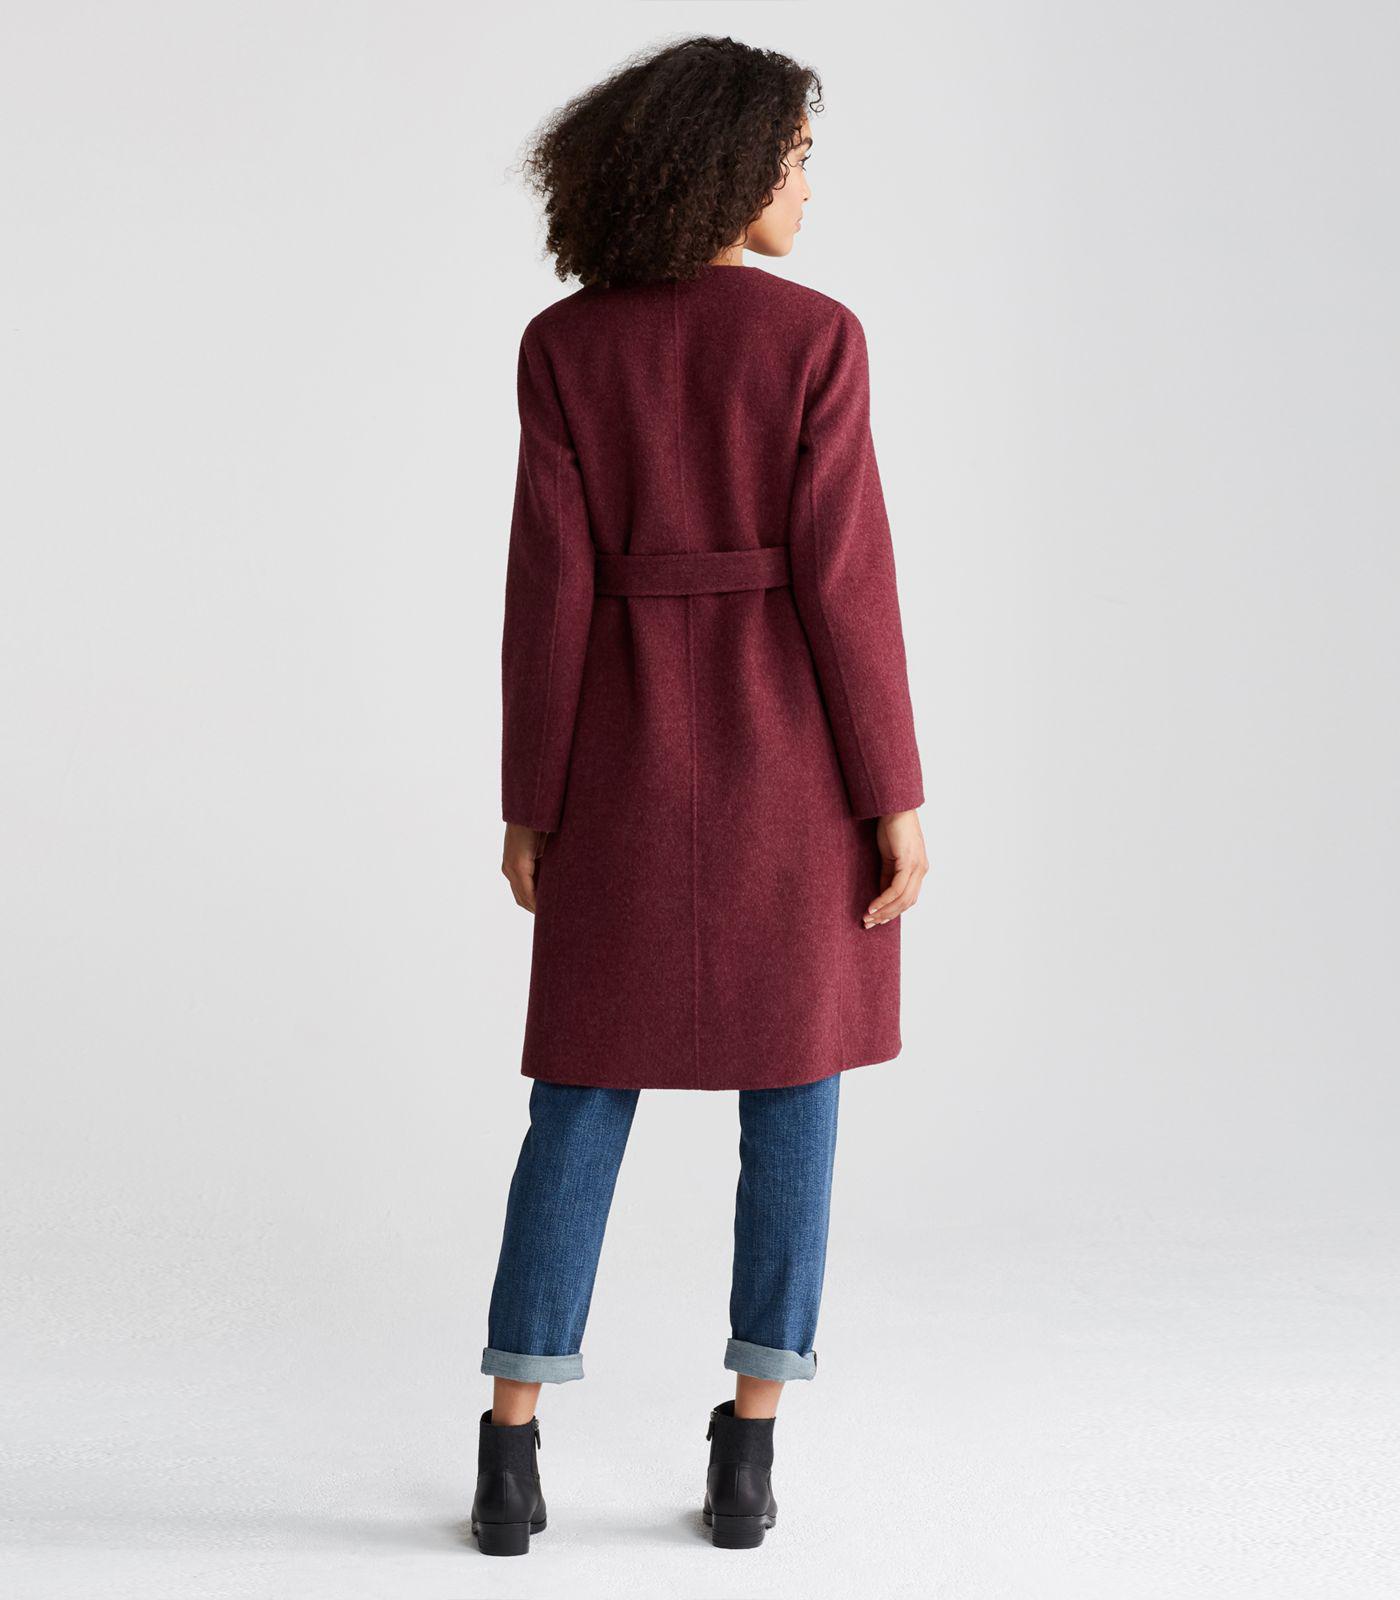 Lyst - Eileen Fisher Brushed Wool Doubleface Long Belted Coat in Red